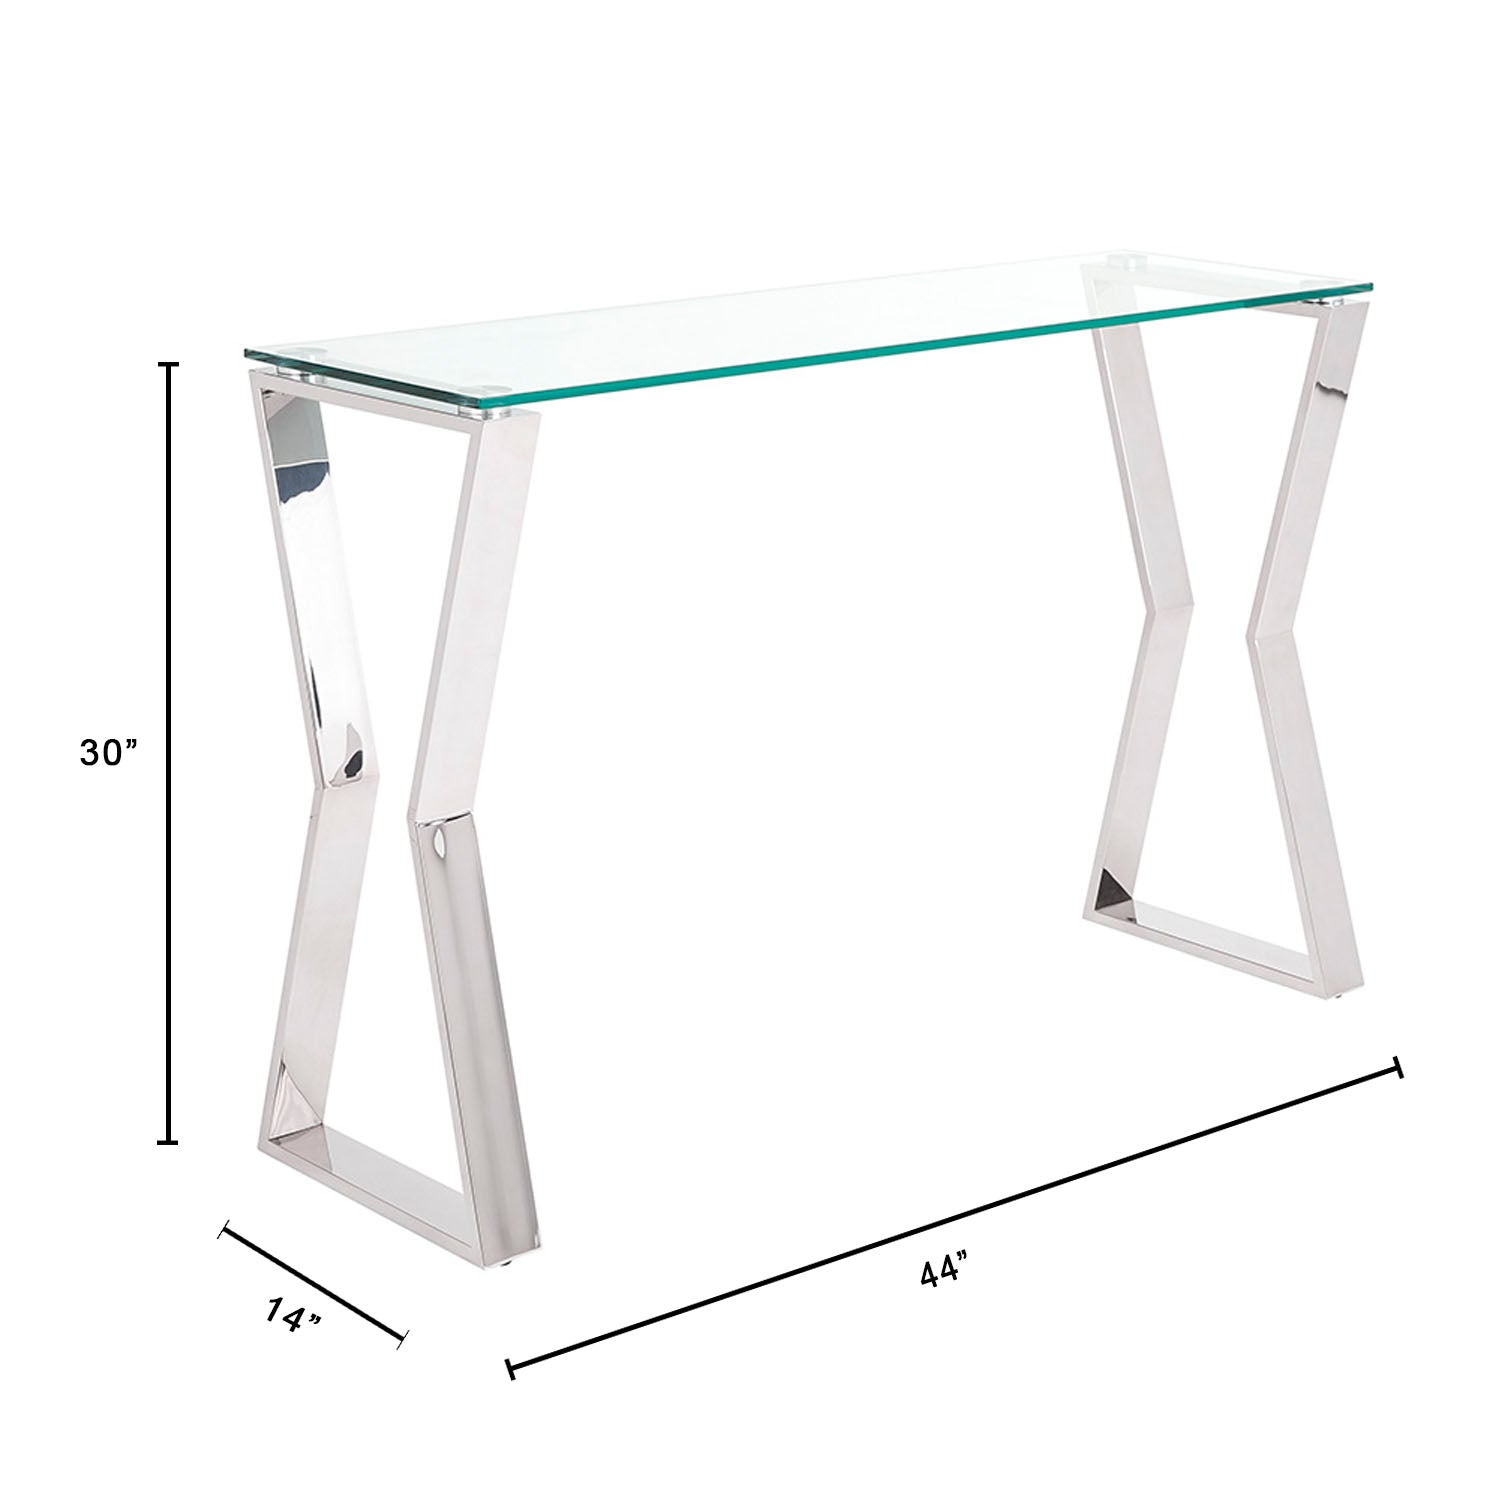 Stylish Elegance Glass & Stainless Steel Console Table